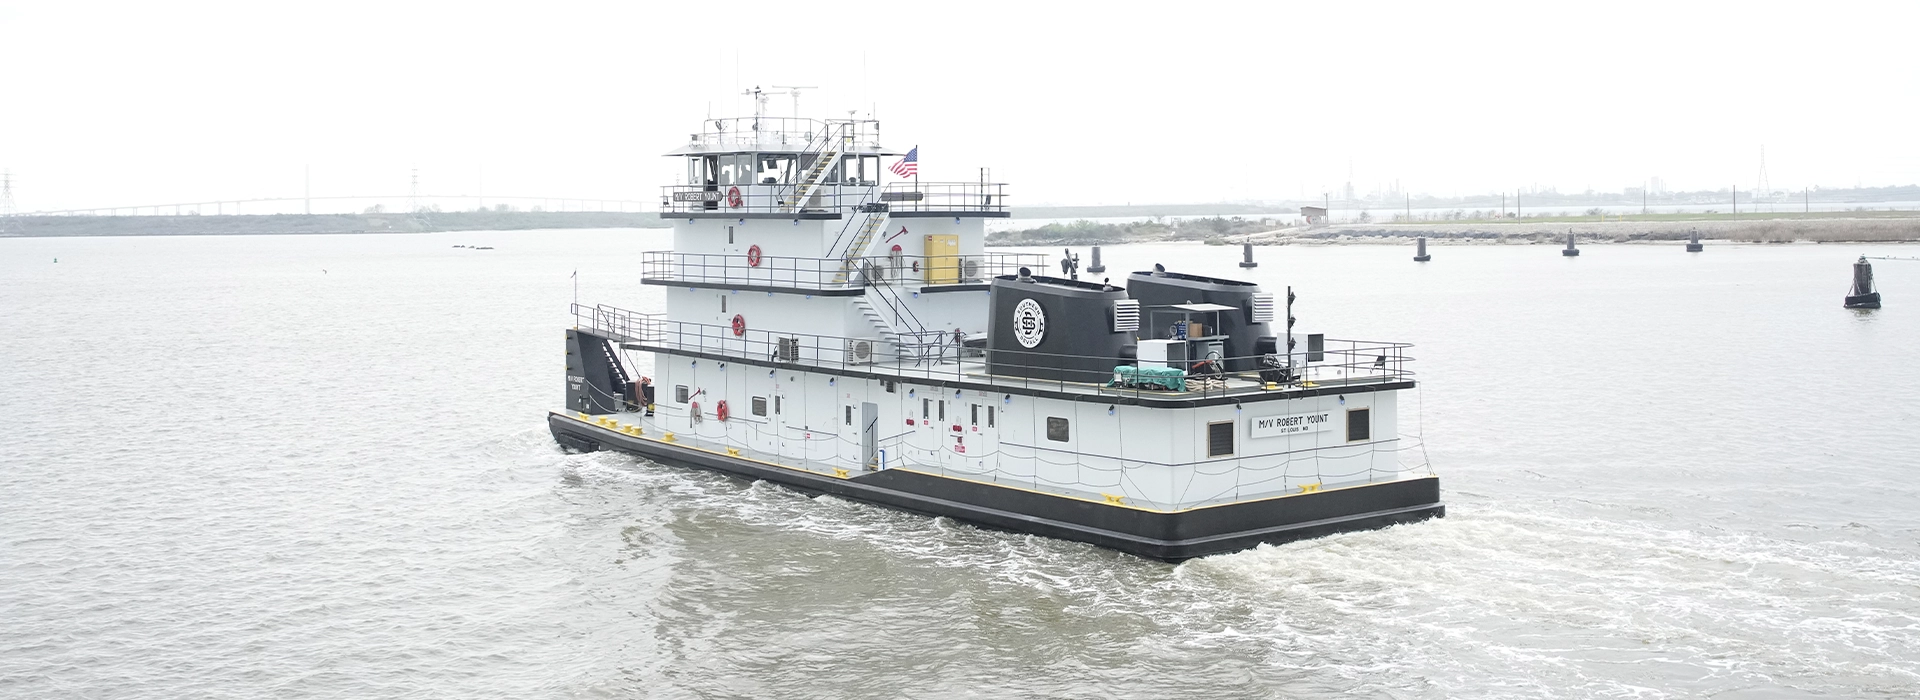 Southern Devall's Towboat, M/V Robert Yount